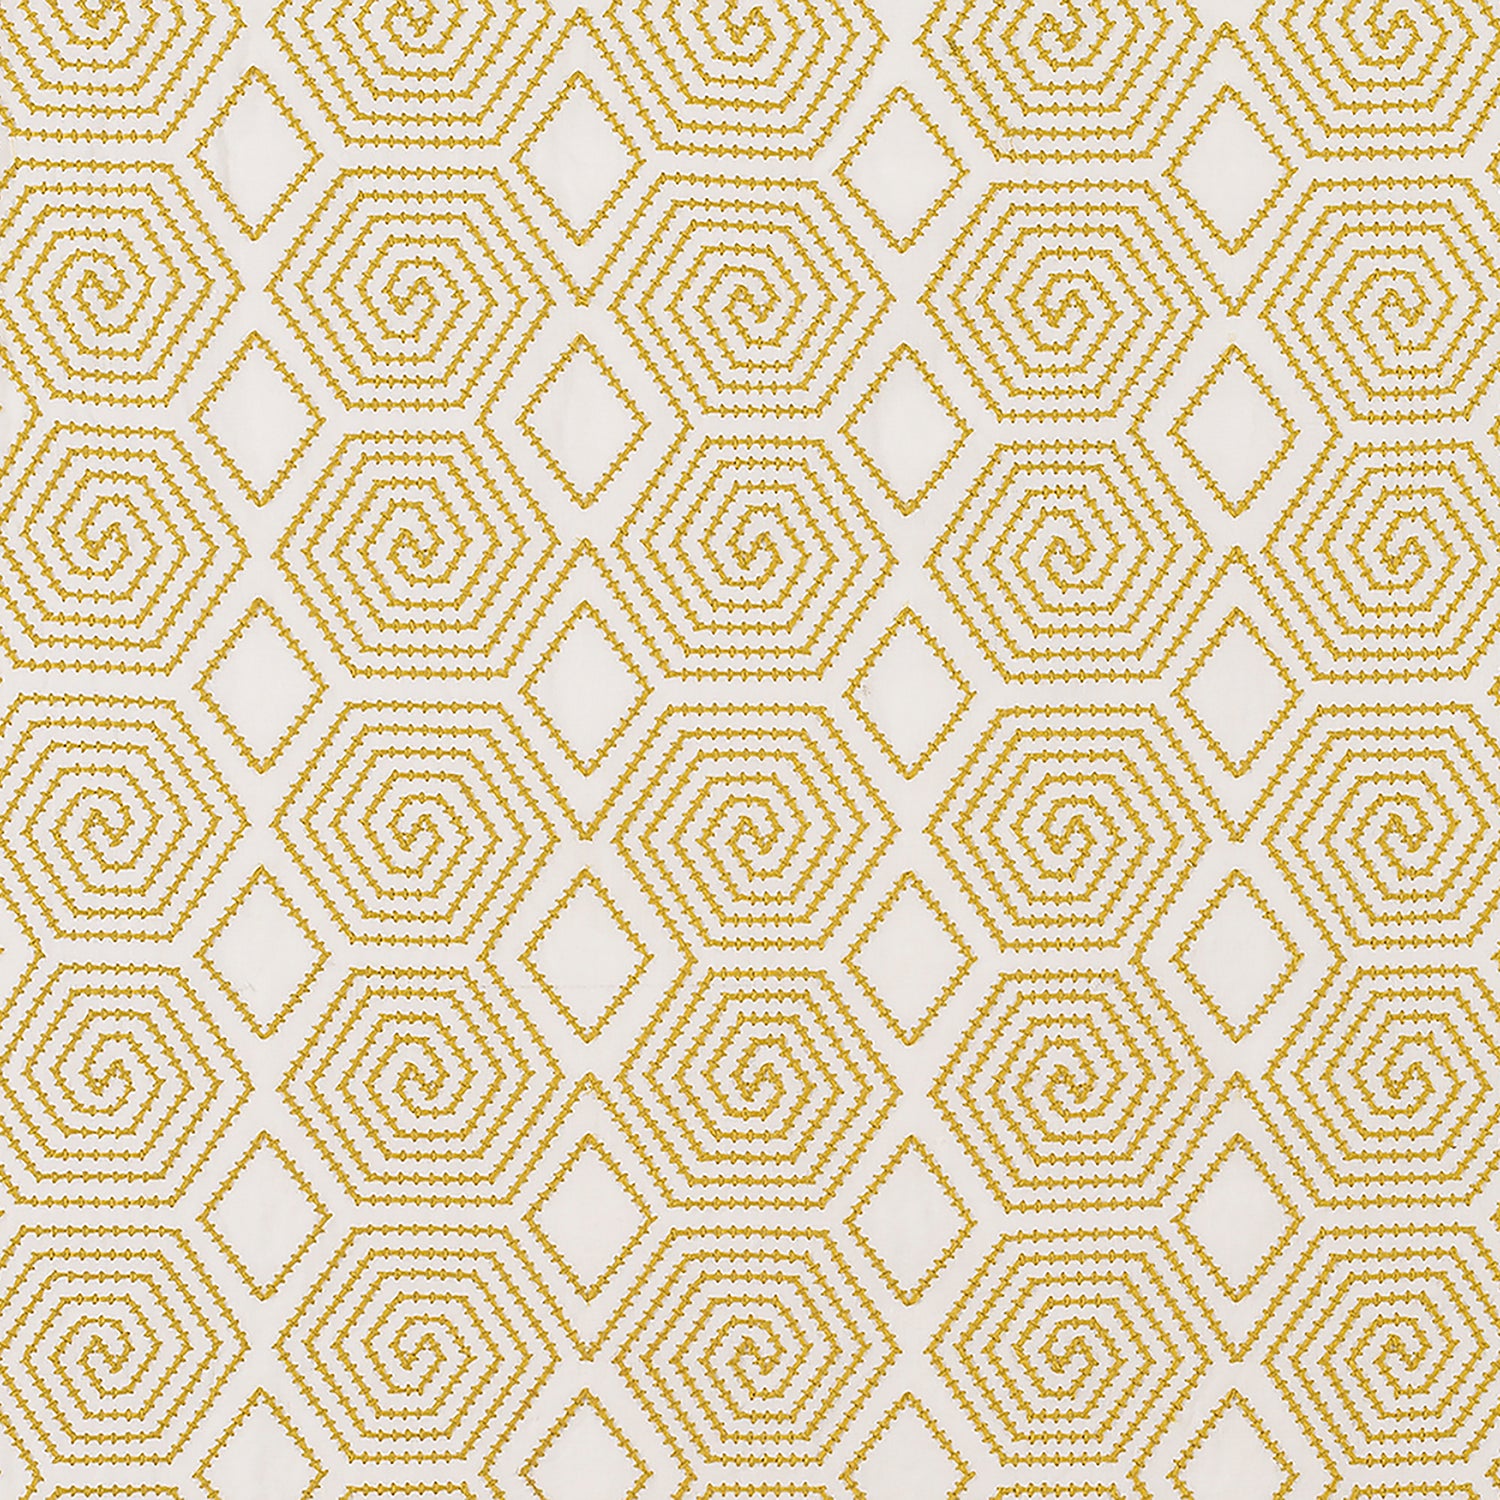 Fabric with a playful embroidered geometric grid print in mustard on a white field.